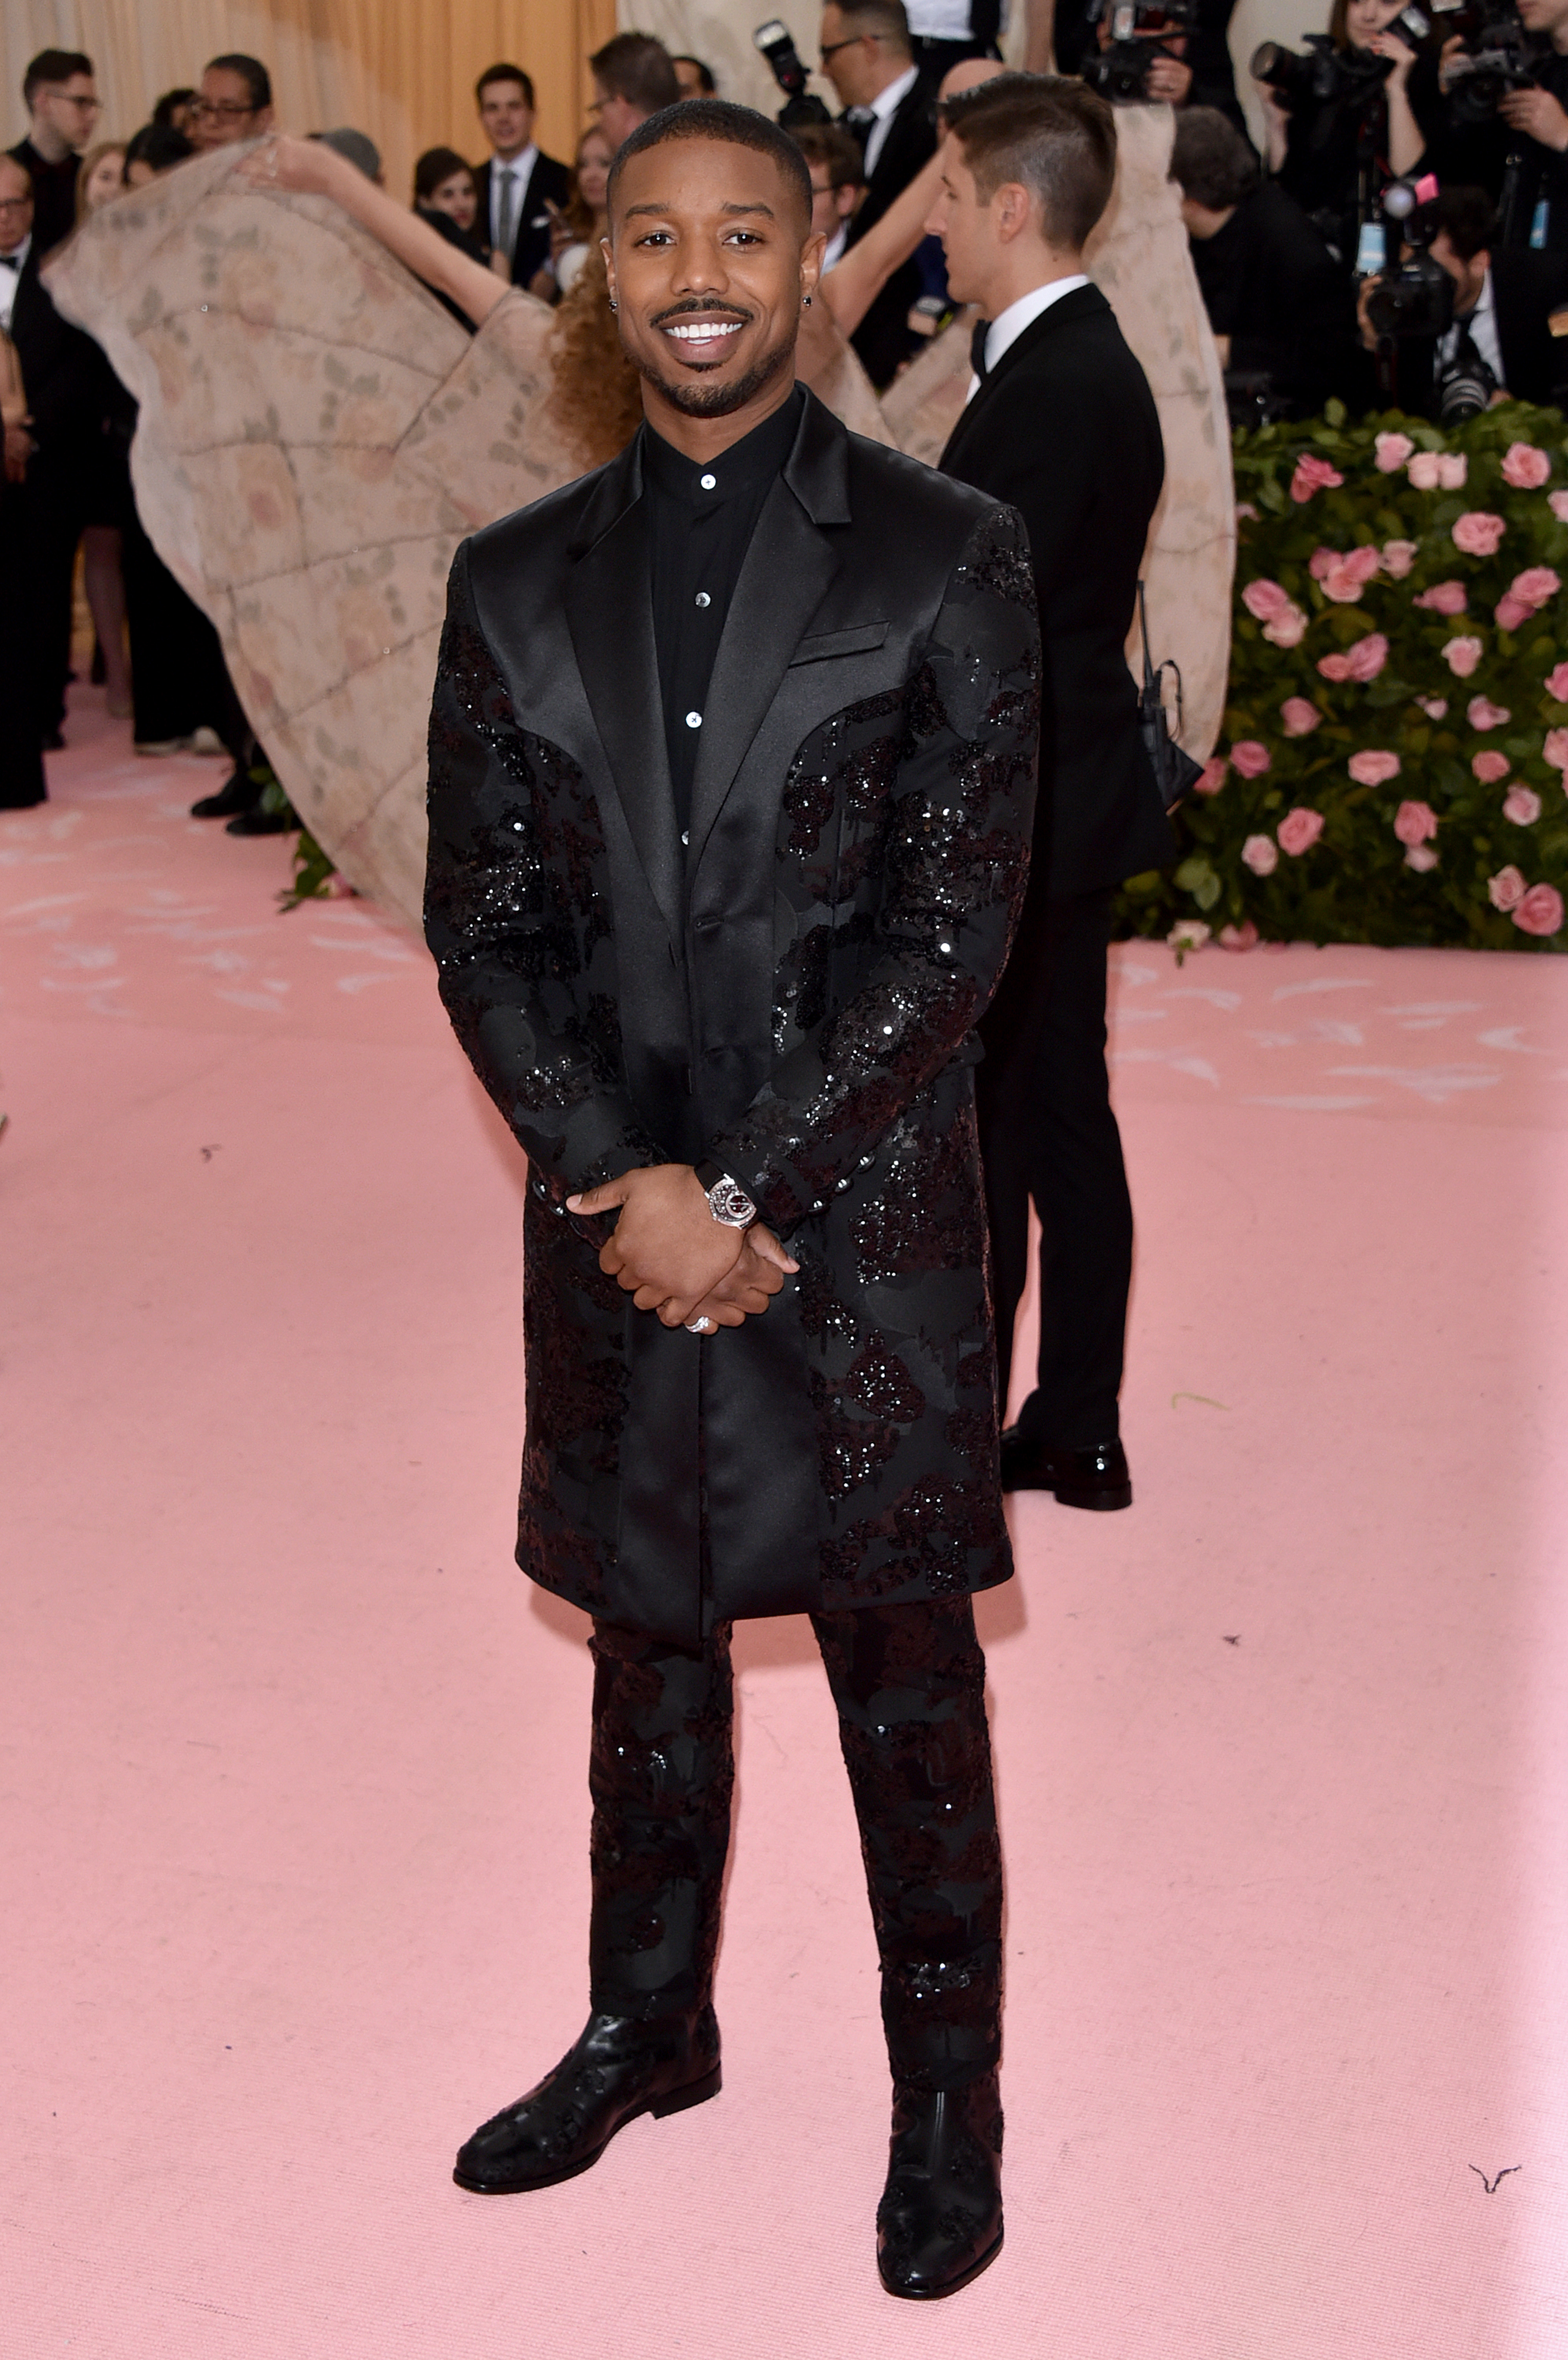 NEW YORK, NEW YORK - MAY 06: Michael B. Jordan attends The 2019 Met Gala Celebrating Camp: Notes on Fashion at Metropolitan Museum of Art on May 06, 2019 in New York City. (Photo by John Shearer/Getty Images for THR)